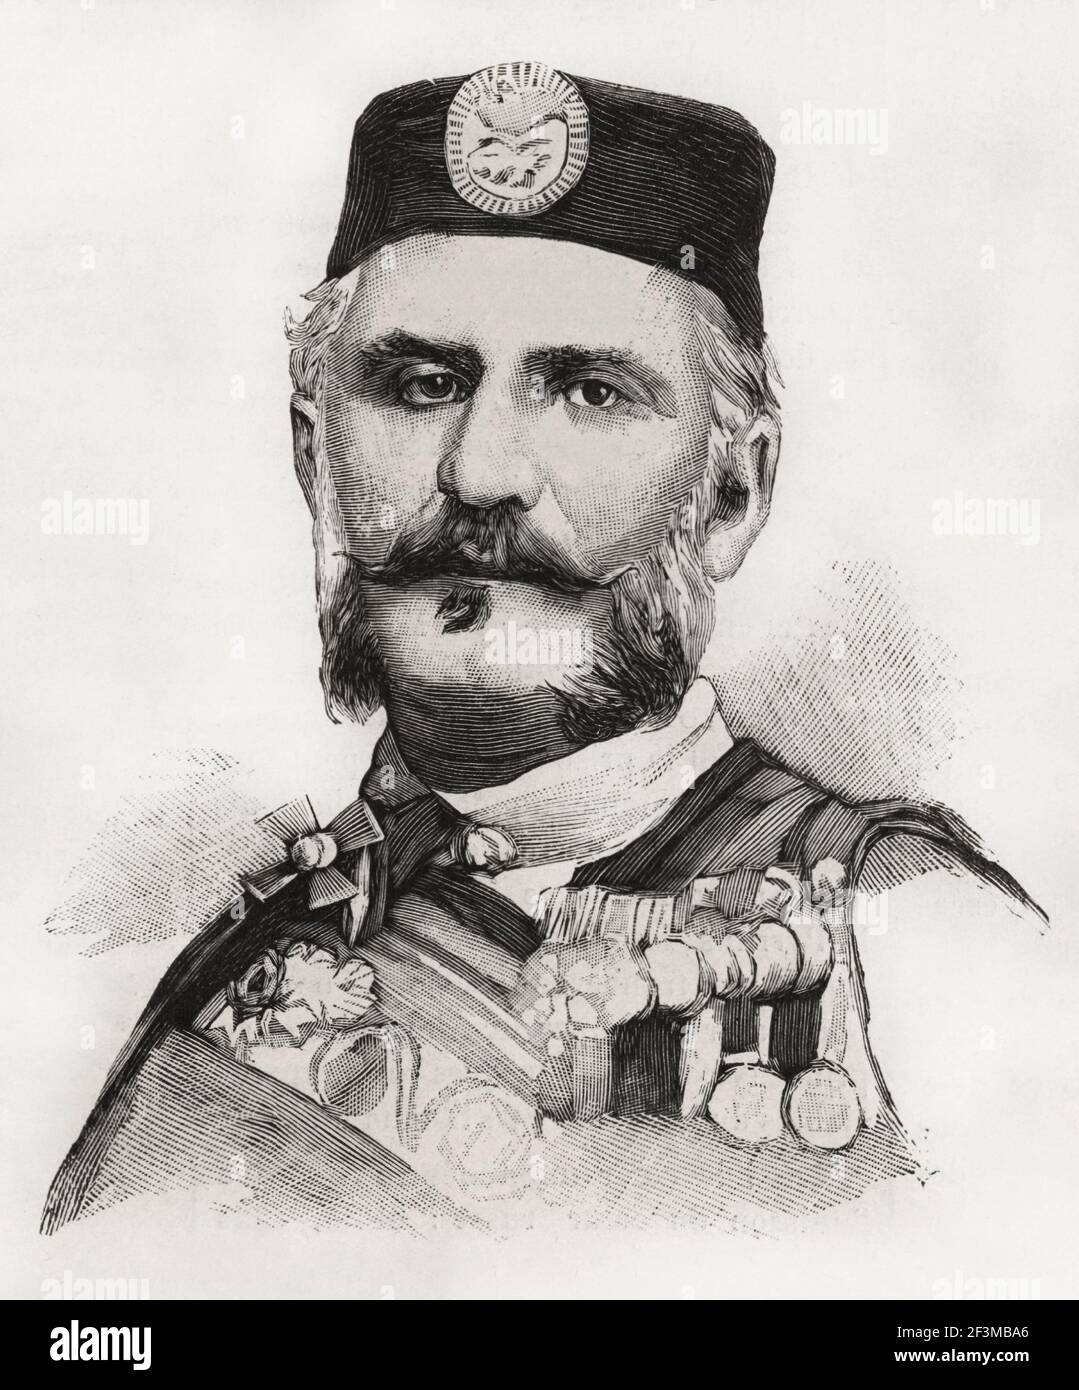 Nicholas I of Montenegro Nikola I Petrovic-Njegos (1841 – 1921) was the ruler of Montenegro from 1860 to 1918, reigning as prince from 1860 to 1910 an Stock Photo